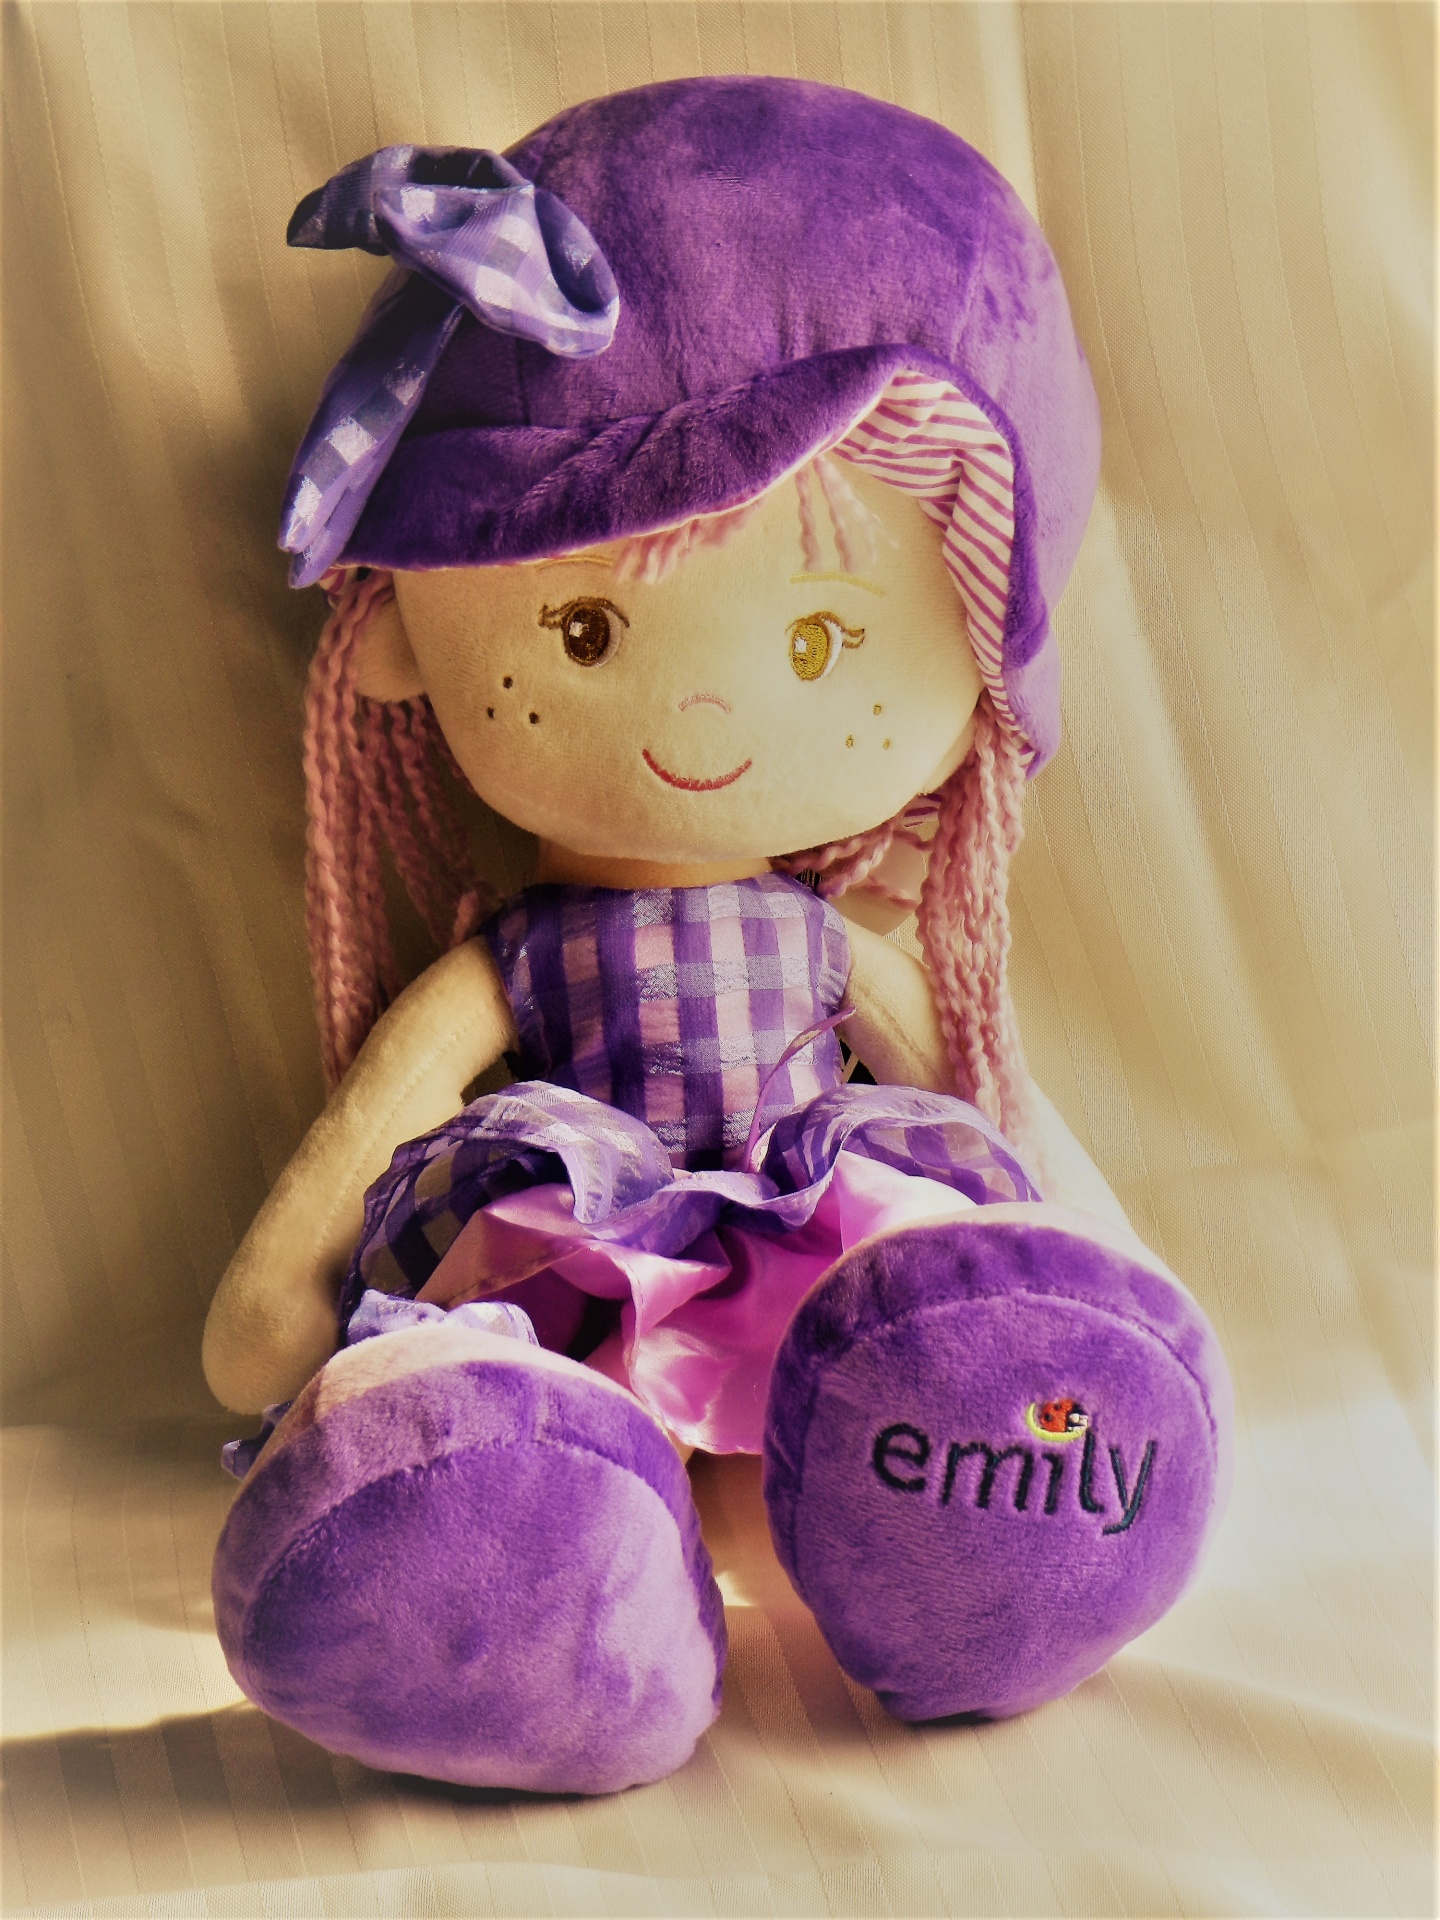 Stylized photo of a purple and gold rag doll